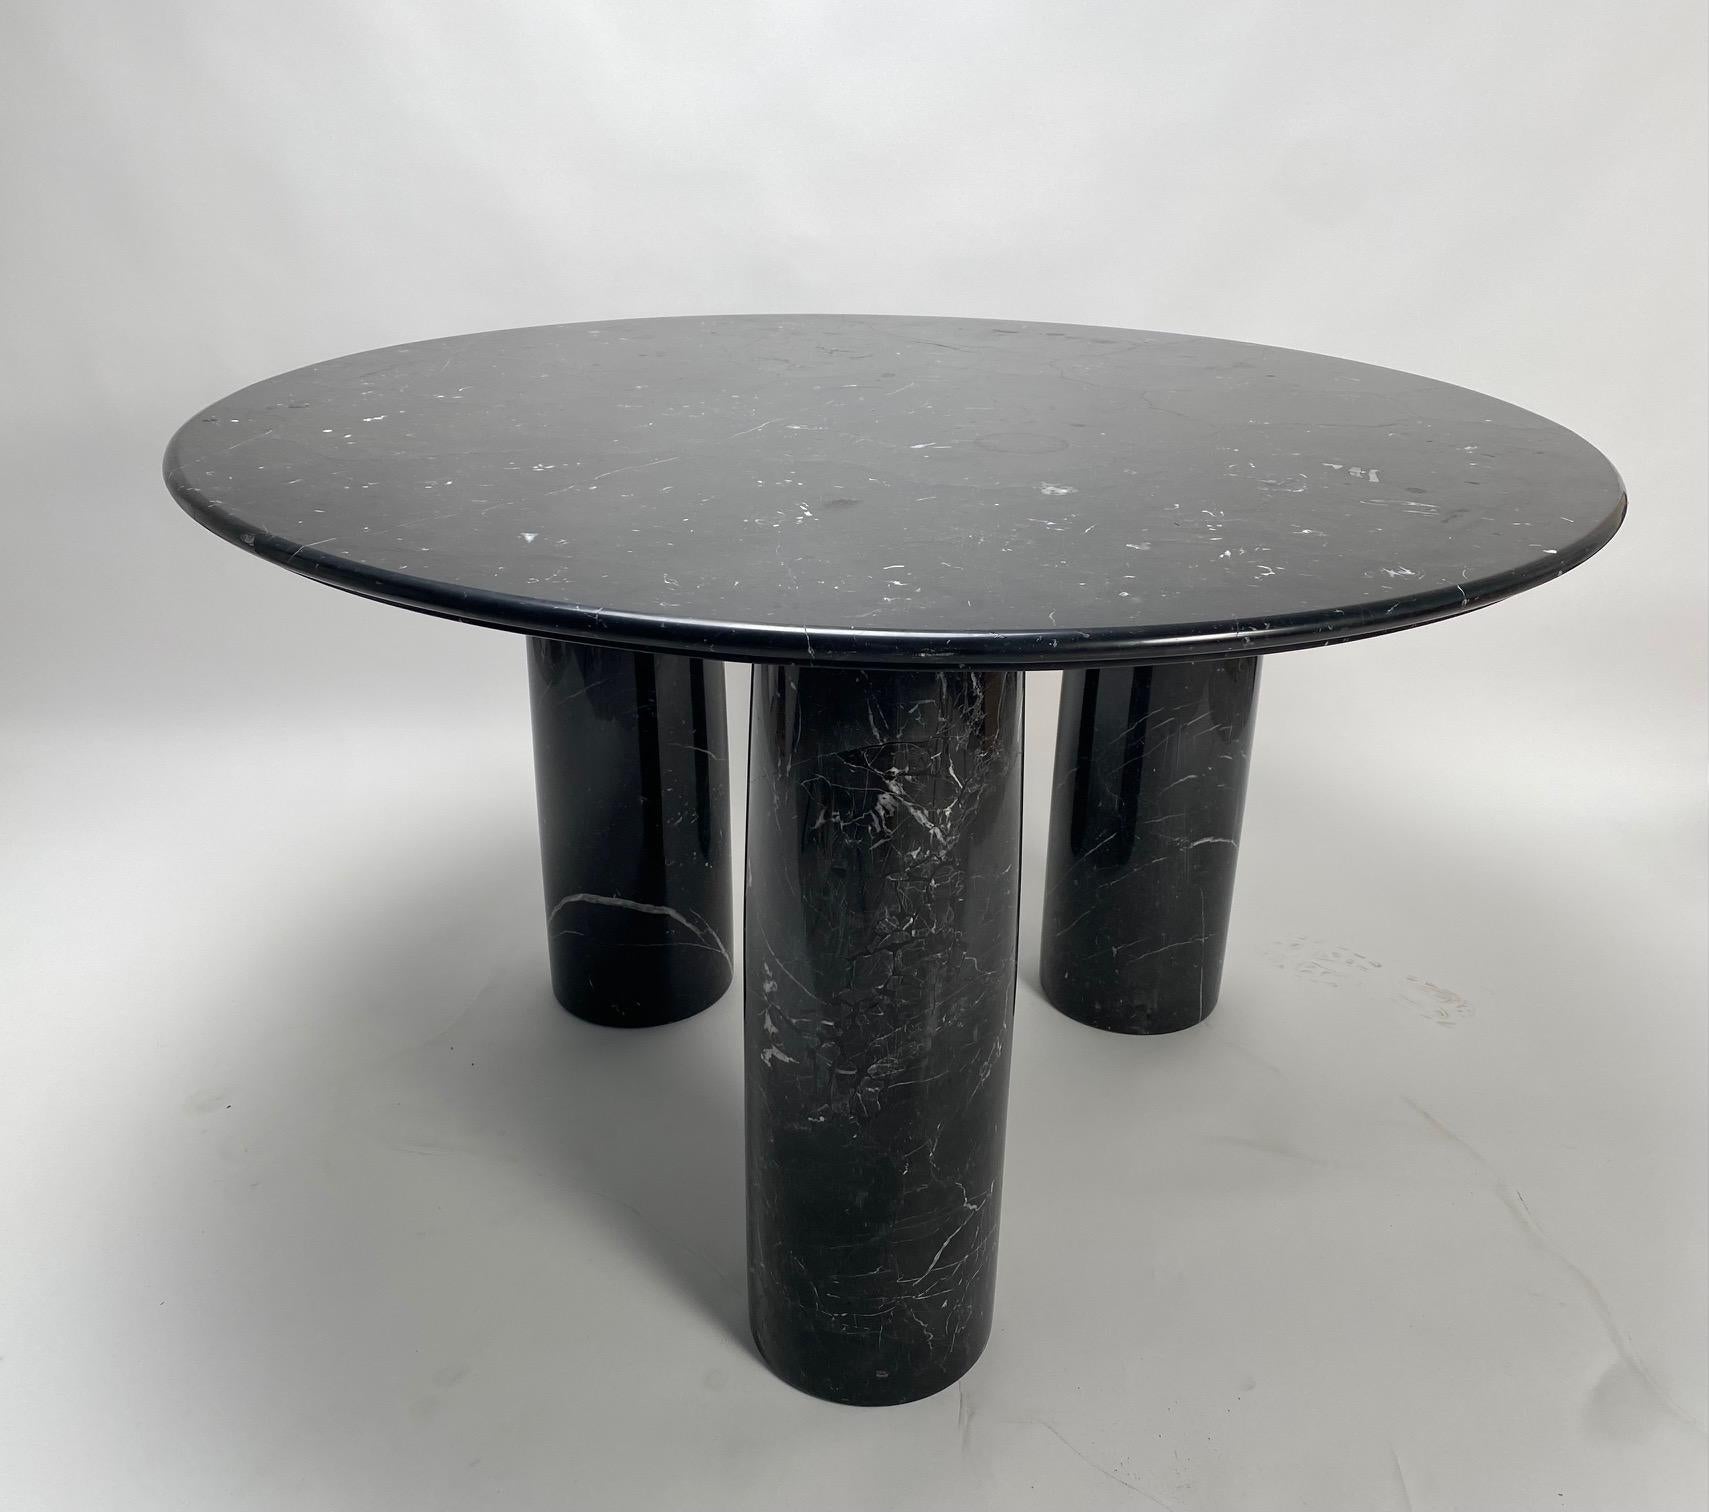 The table, designed by the famous Italian architect Mario Bellini for the Cassina company, was conceived in the 1970s and draws its inspiration from the architecture of Roman antiquities. This specimen has a round top in thick black marble and three